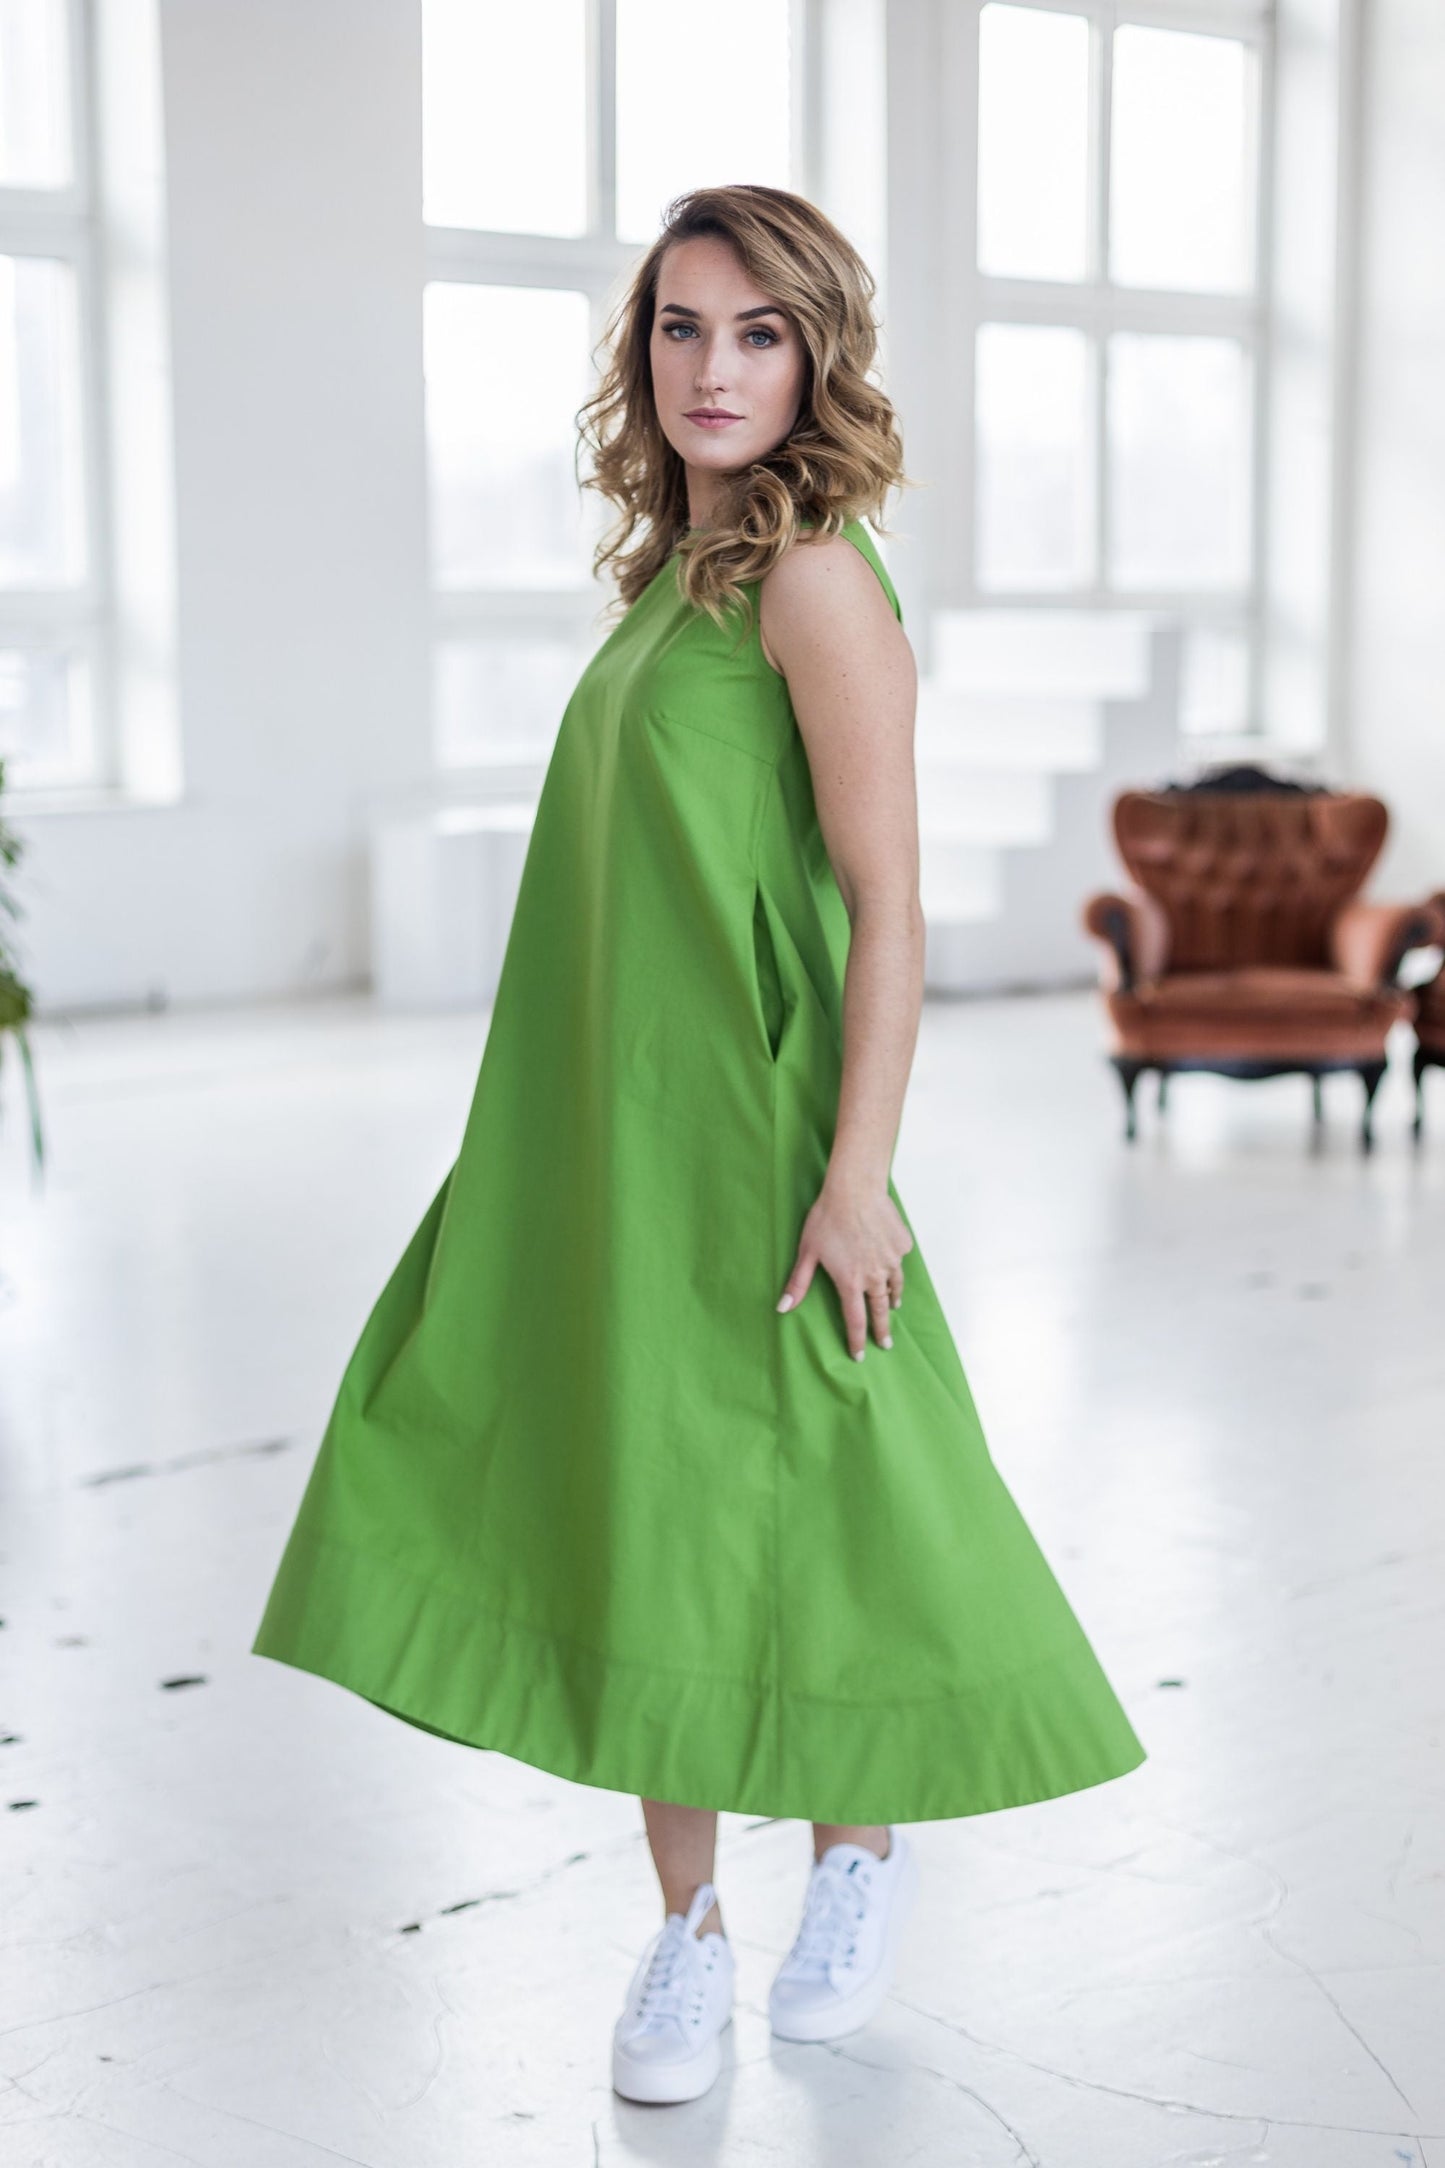 Green bell dress with pockets